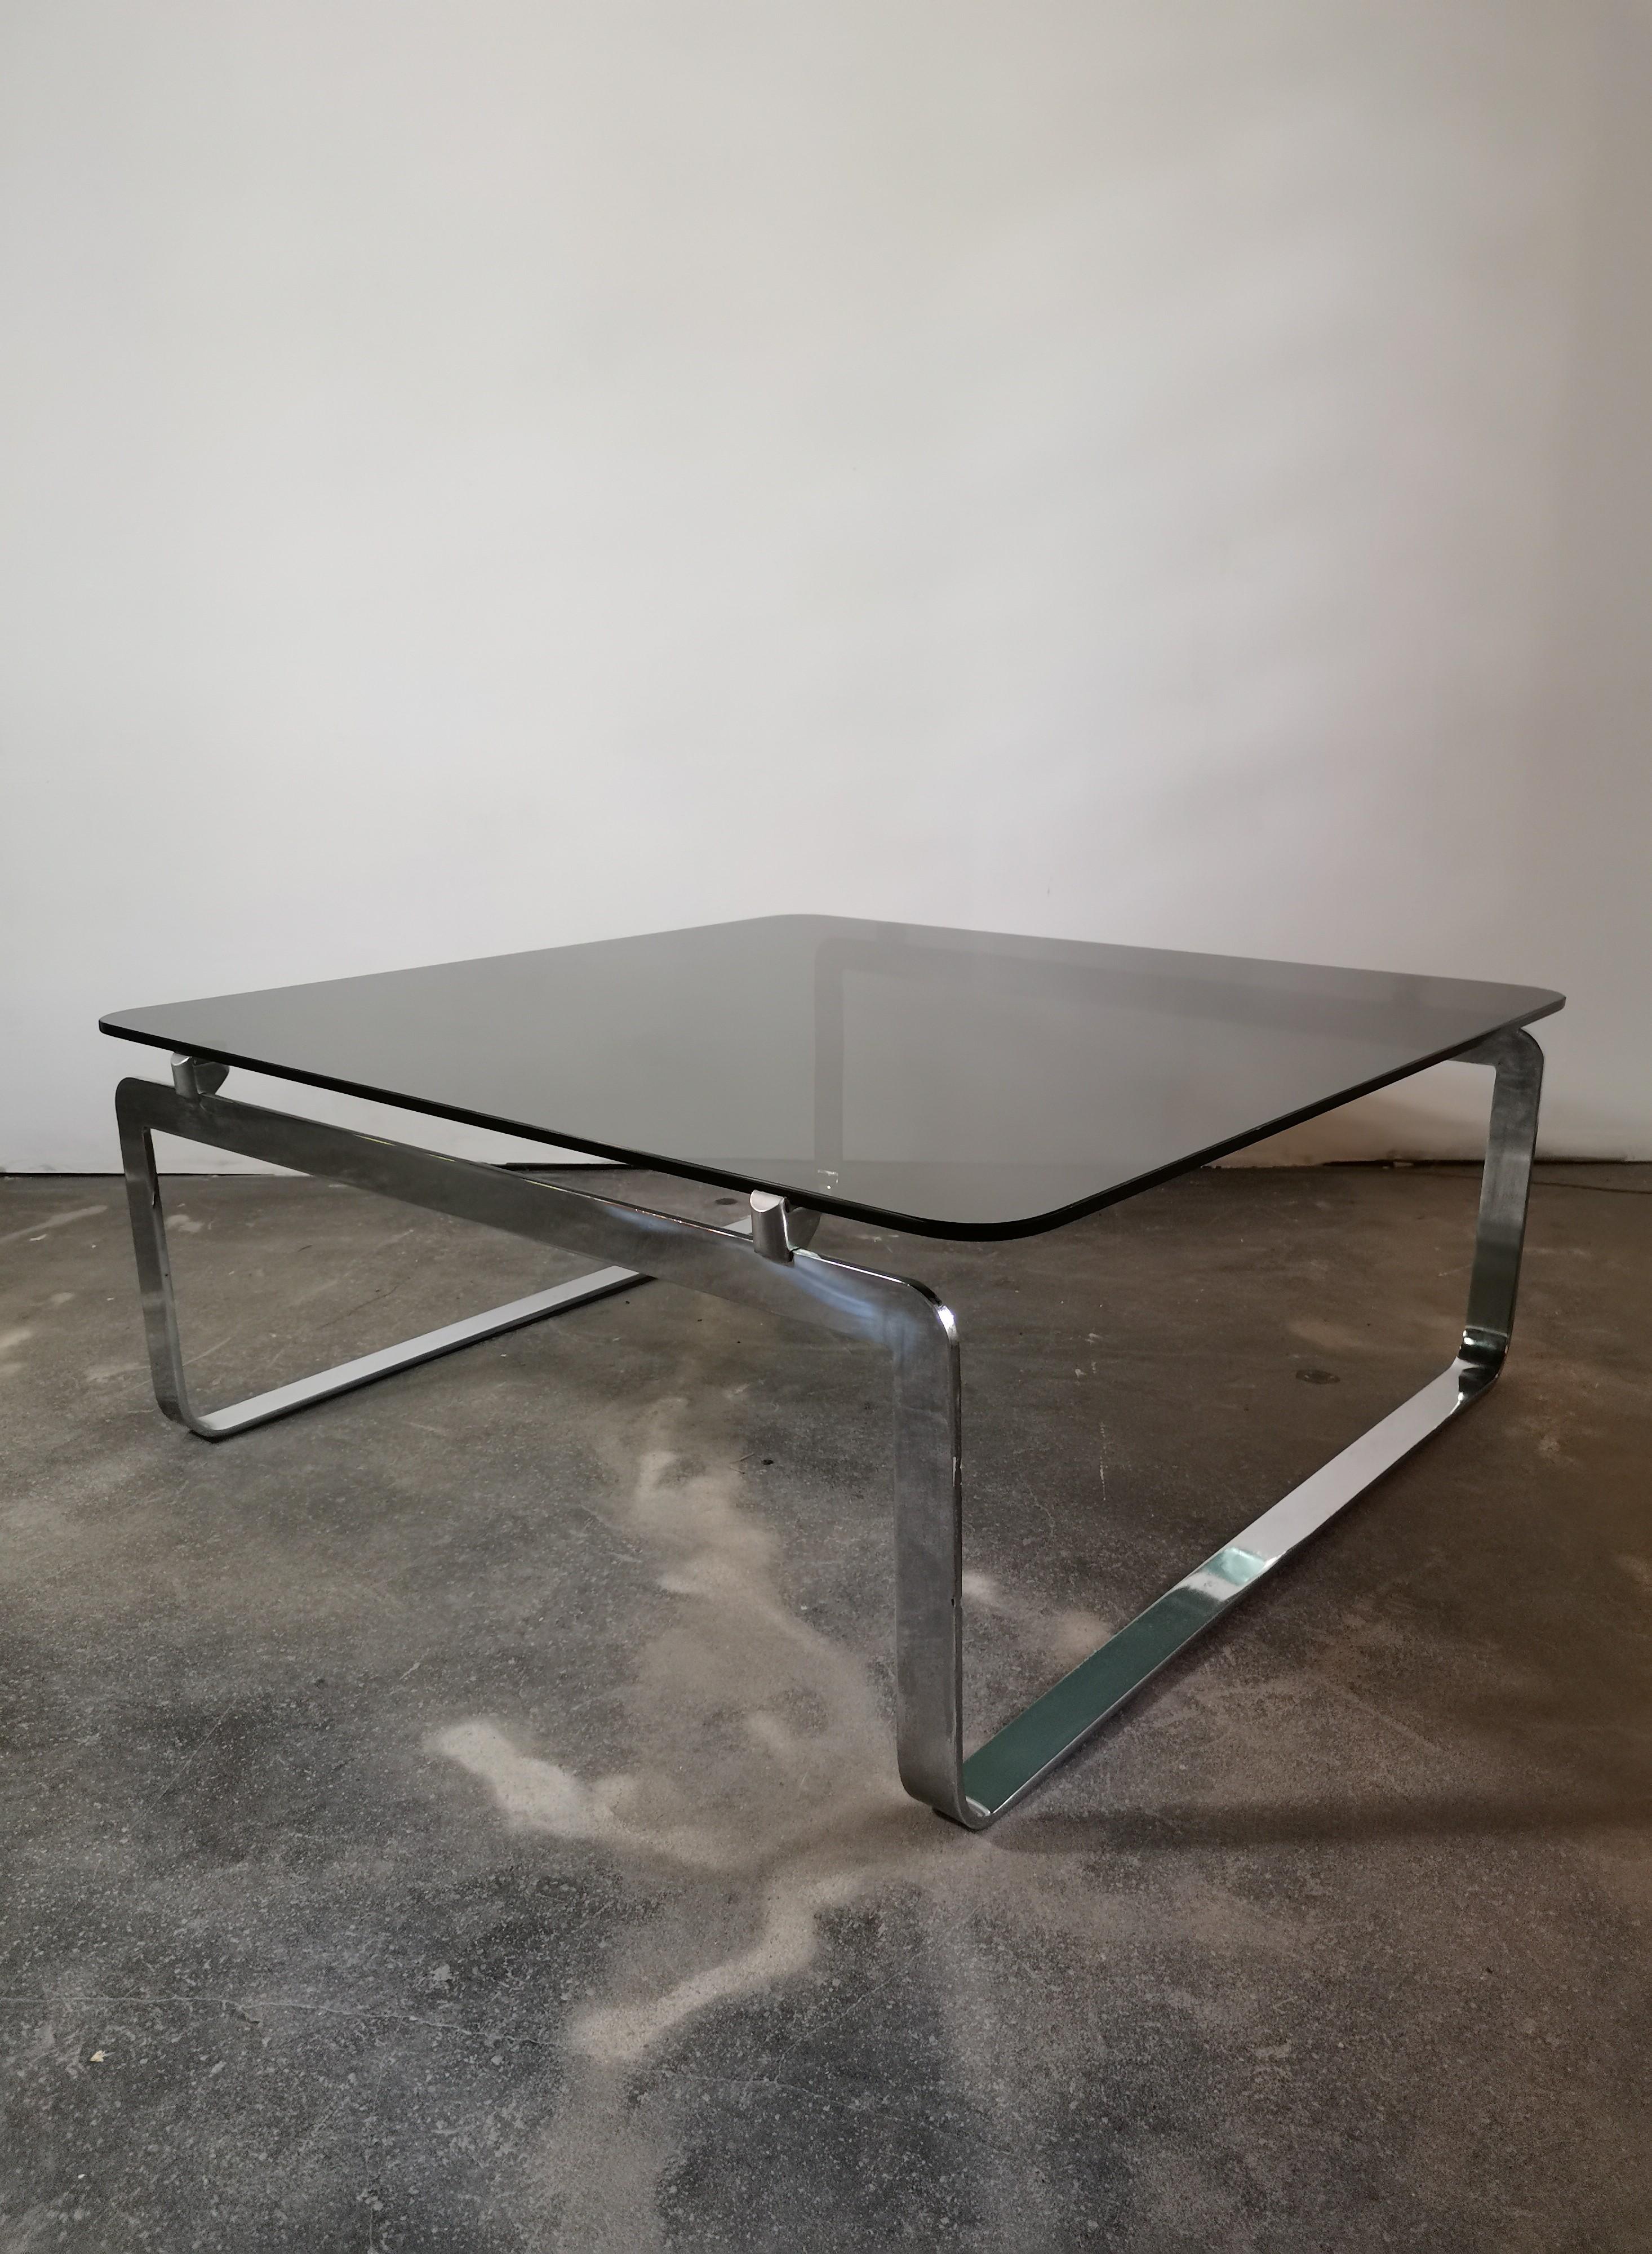 Elegant square coffee table designerd by French Bernard Govin and beautifully crafted in 1960s.

Sled-style base made from chromed steel with smoked glass tabletop.

Manufactured in Italy.